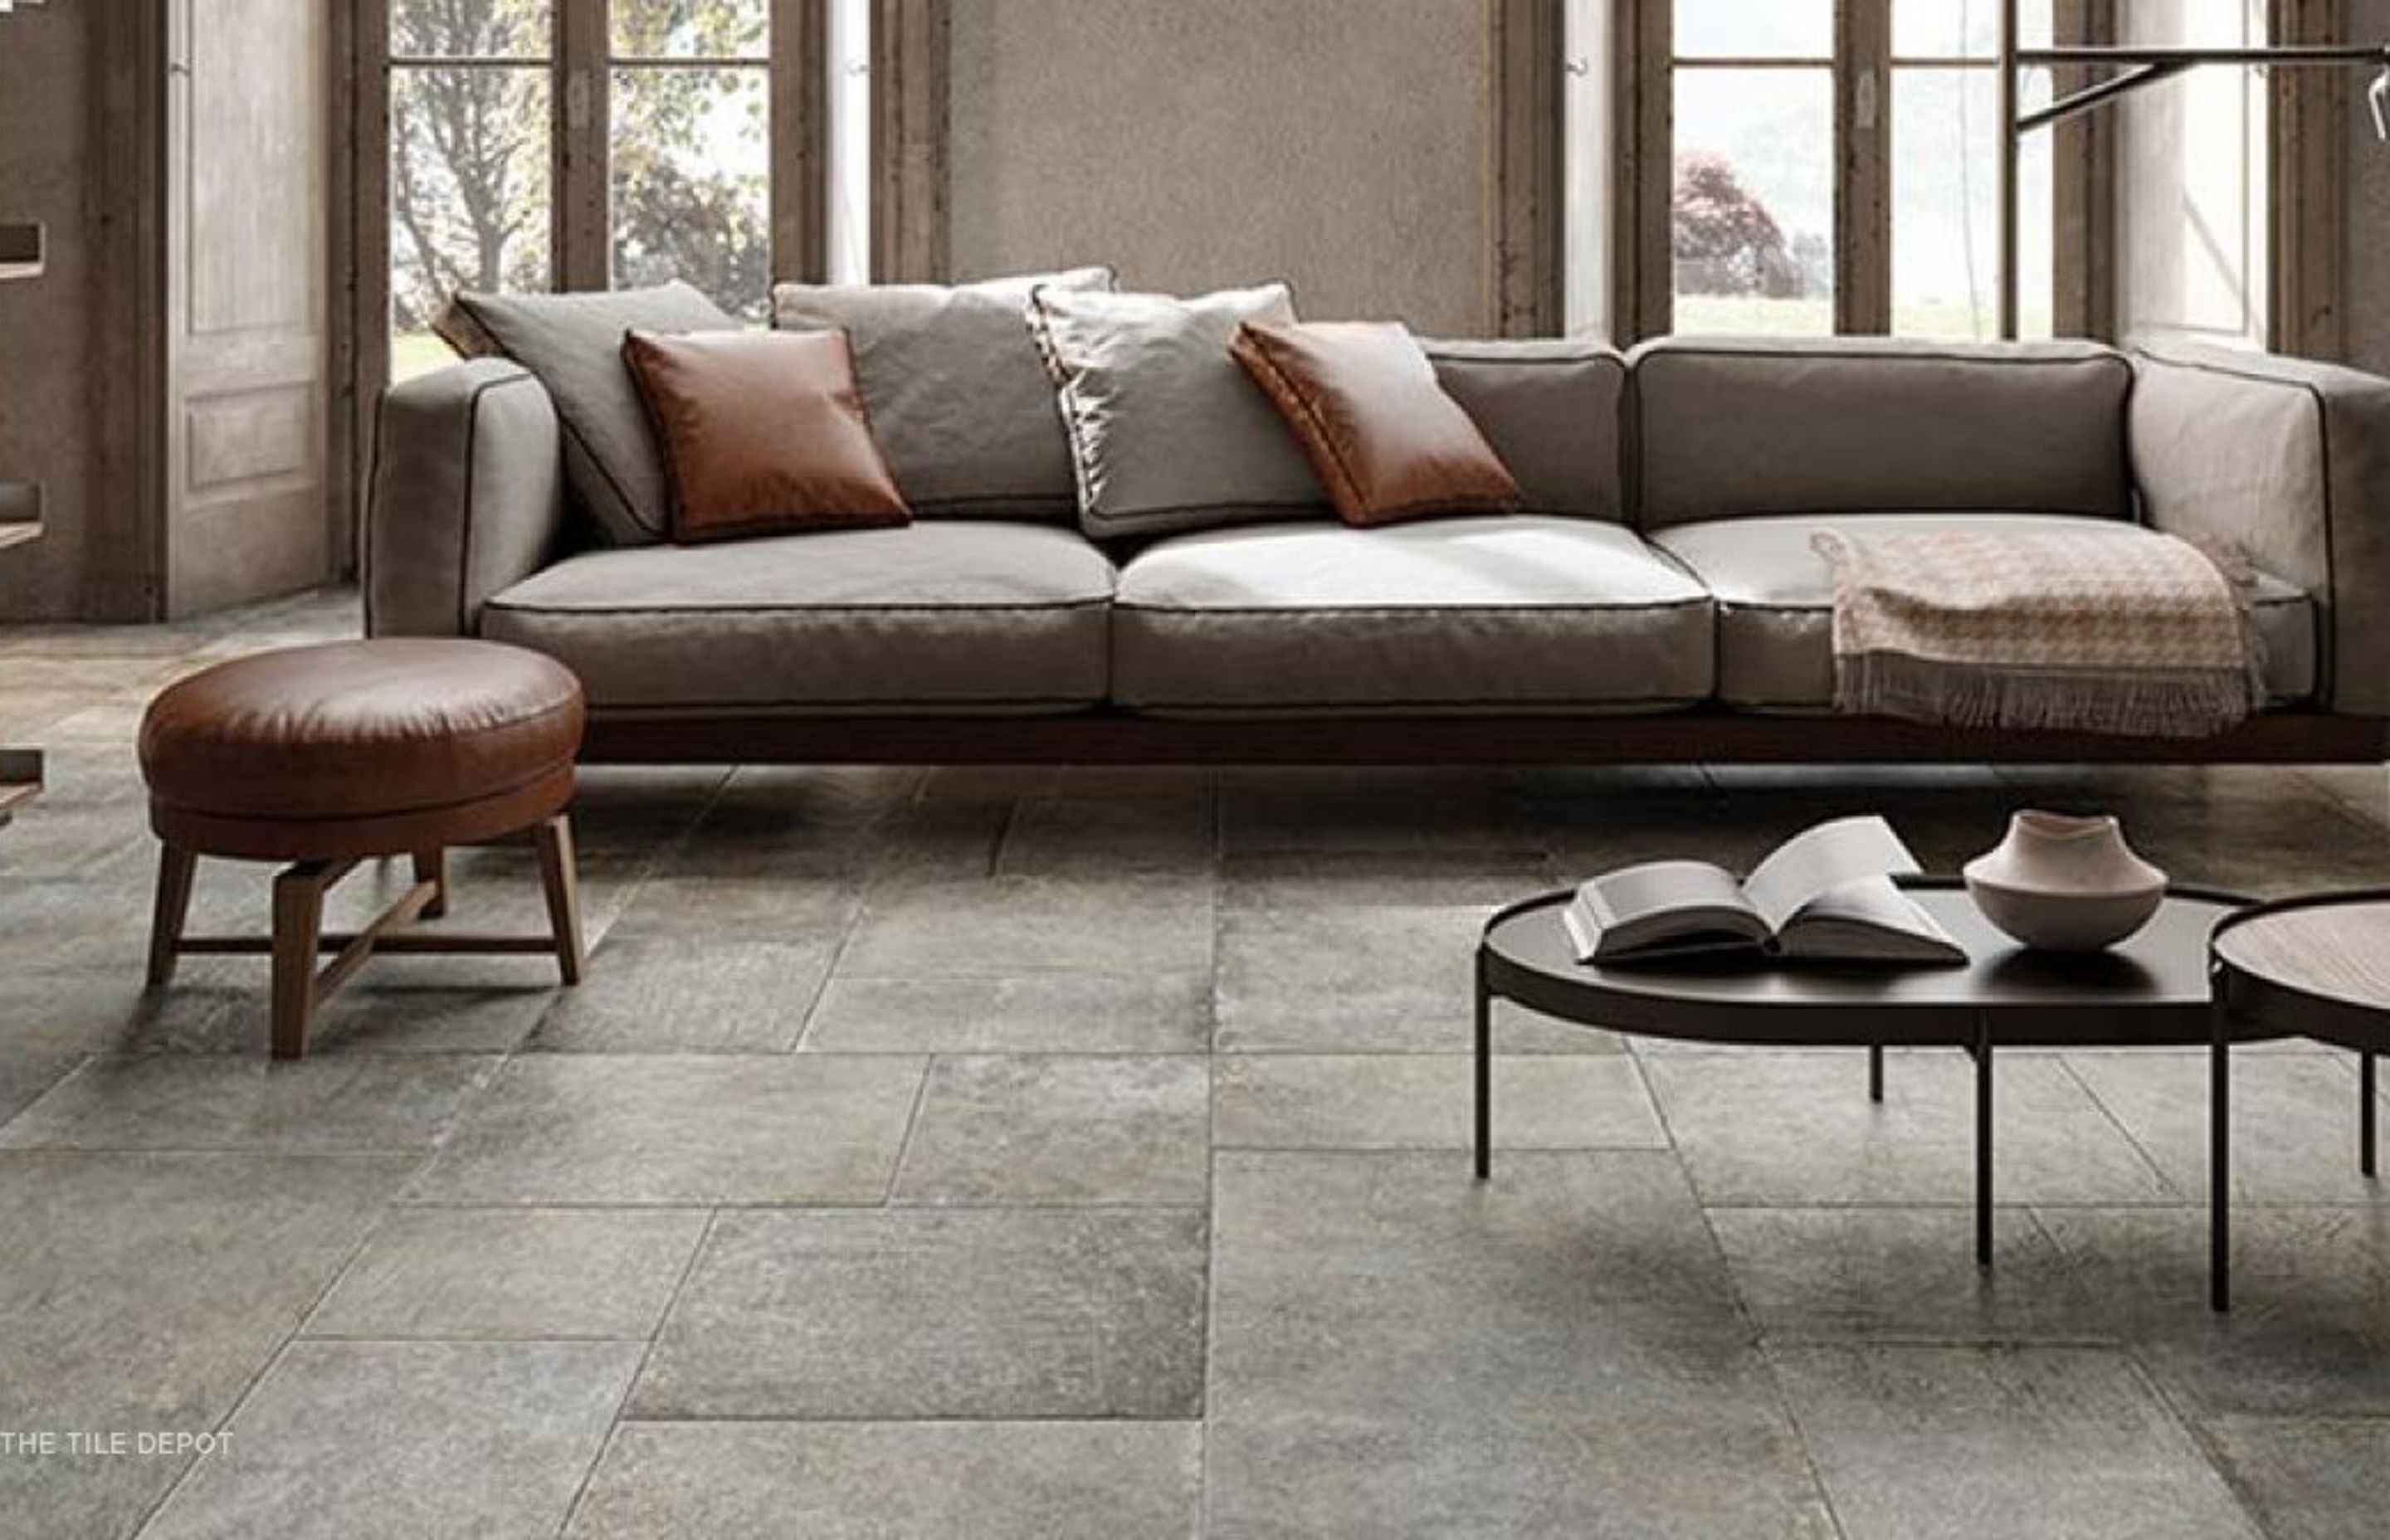 Non-glazed tiles from the Heritage Collection (Tile depot 2021)